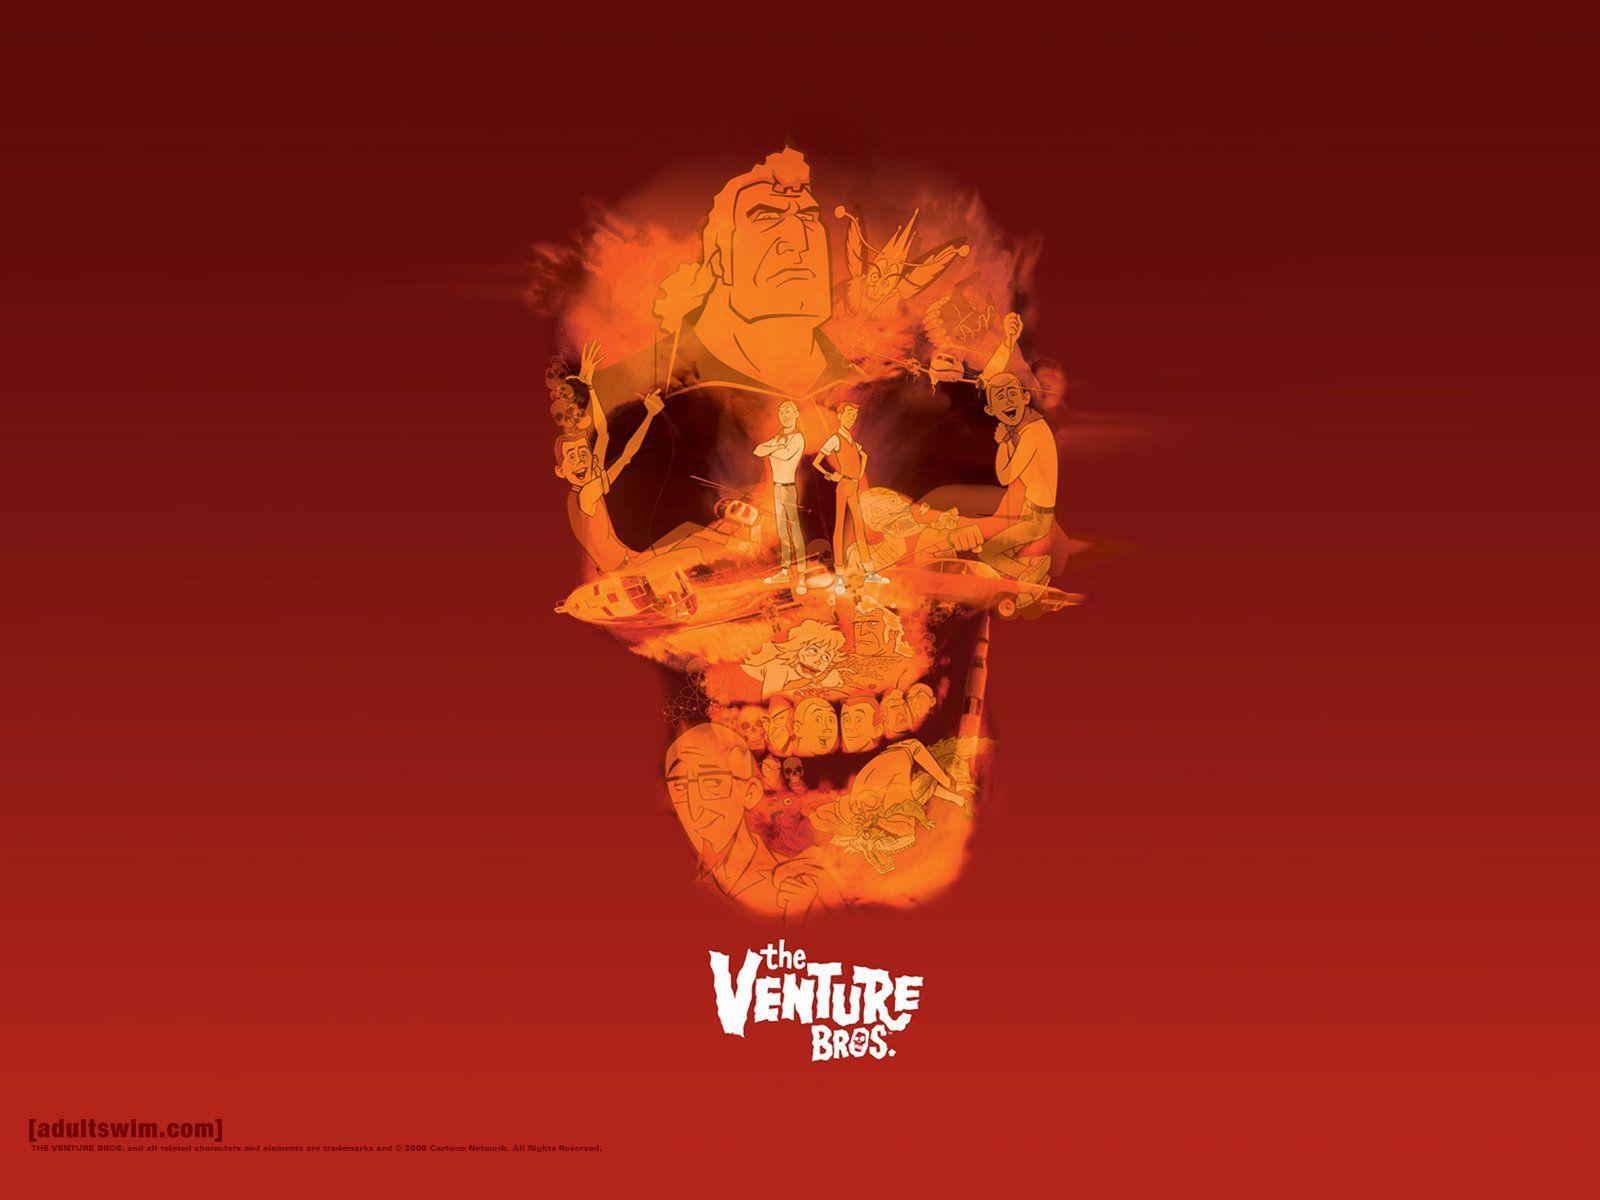 Venture Brothers wallpaper for you. The Venture